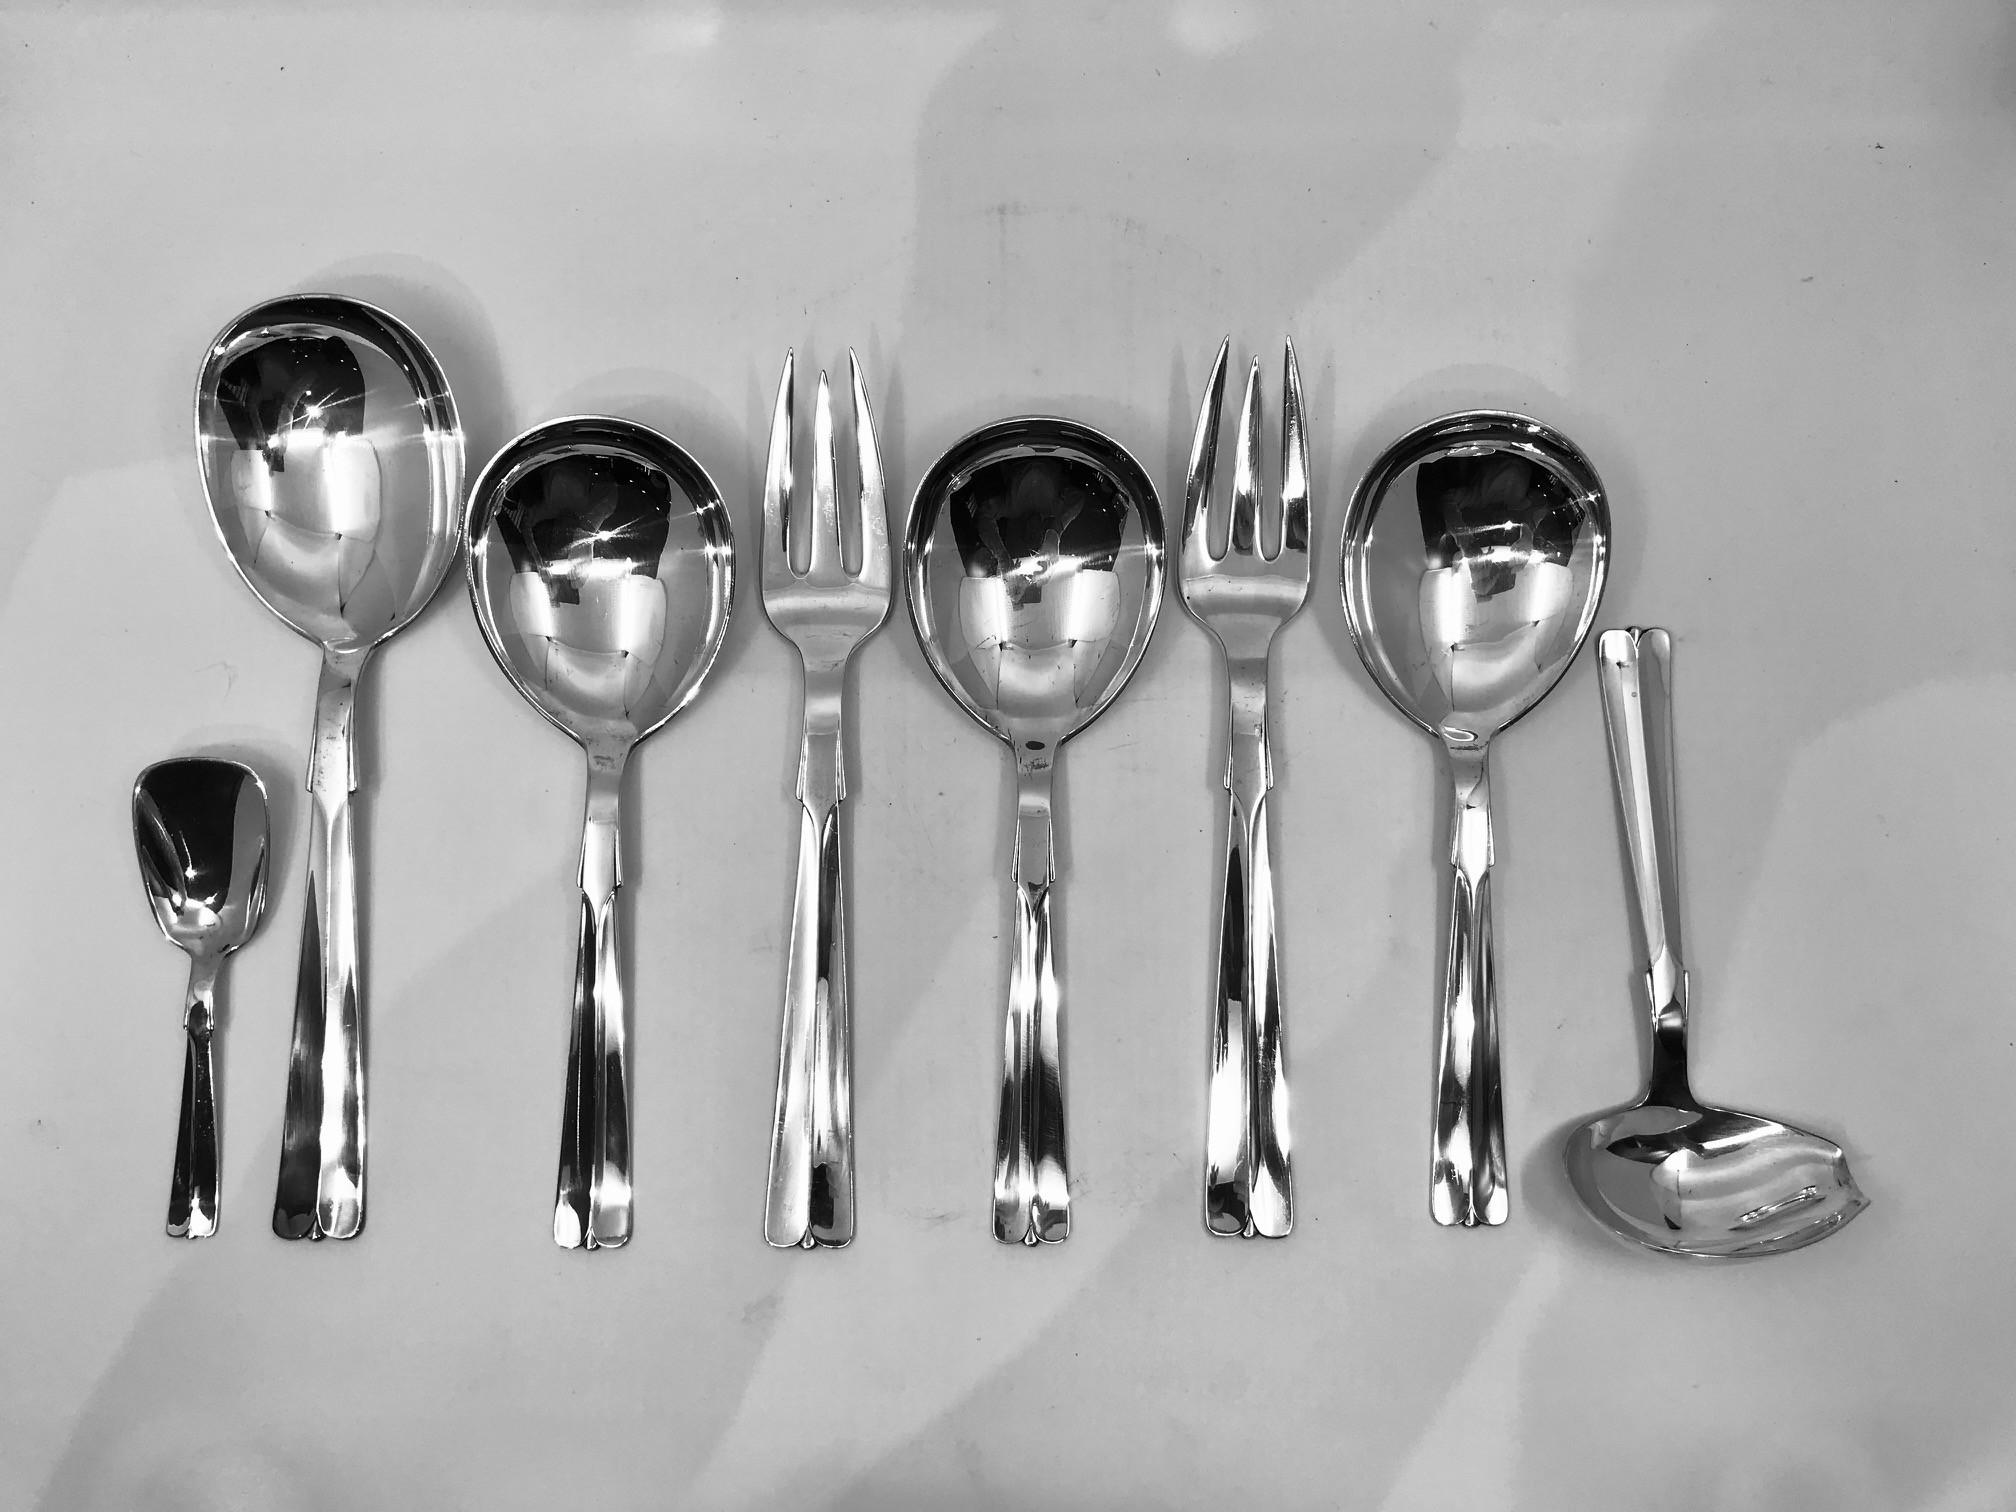 This is a sterling silver Hans Hansen silverware service for 12 in the Baronet pattern (Danish name Arvesølv #7). Each setting comprises 7 pieces, plus serving pieces.

This set includes:
12x Dinner Forks, 12x Dinner Knives, 12x Soup Spoons, 12x